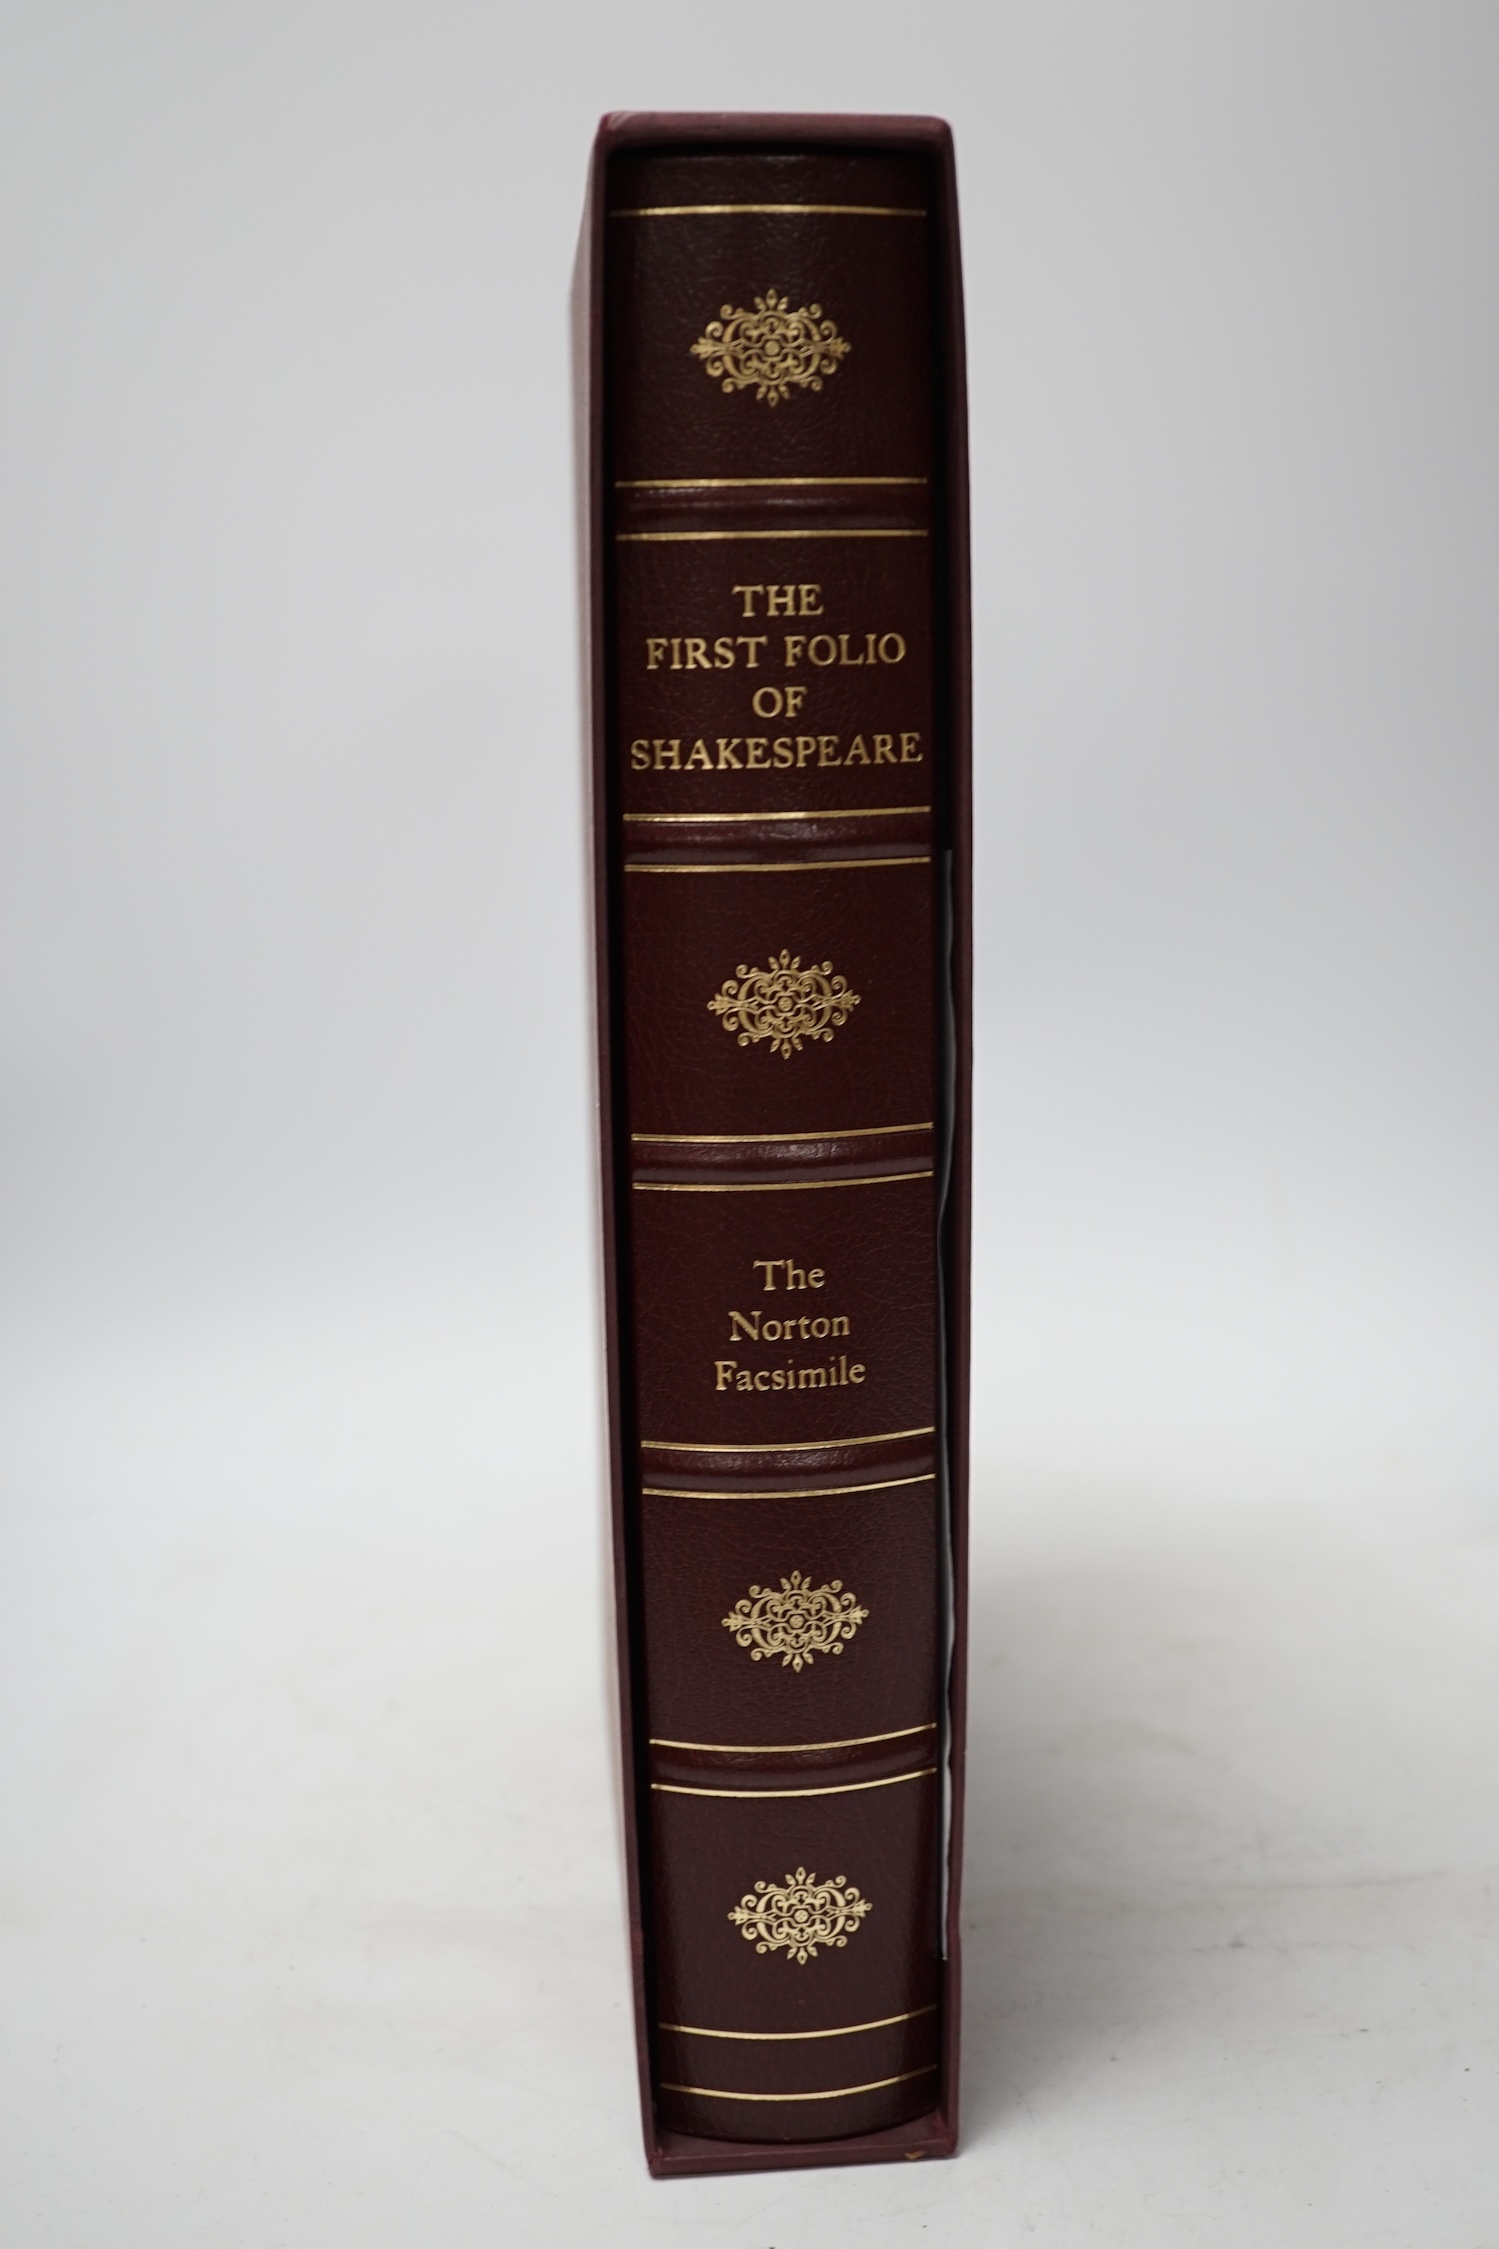 Shakespeare, William - The Norton Facsimile. The First Folio of Shakespeare: based on folios in the Folger Shakespeare Library Collection ... 2nd edition, with a new introduction by Peter W.M. Blaney; publisher's maroon